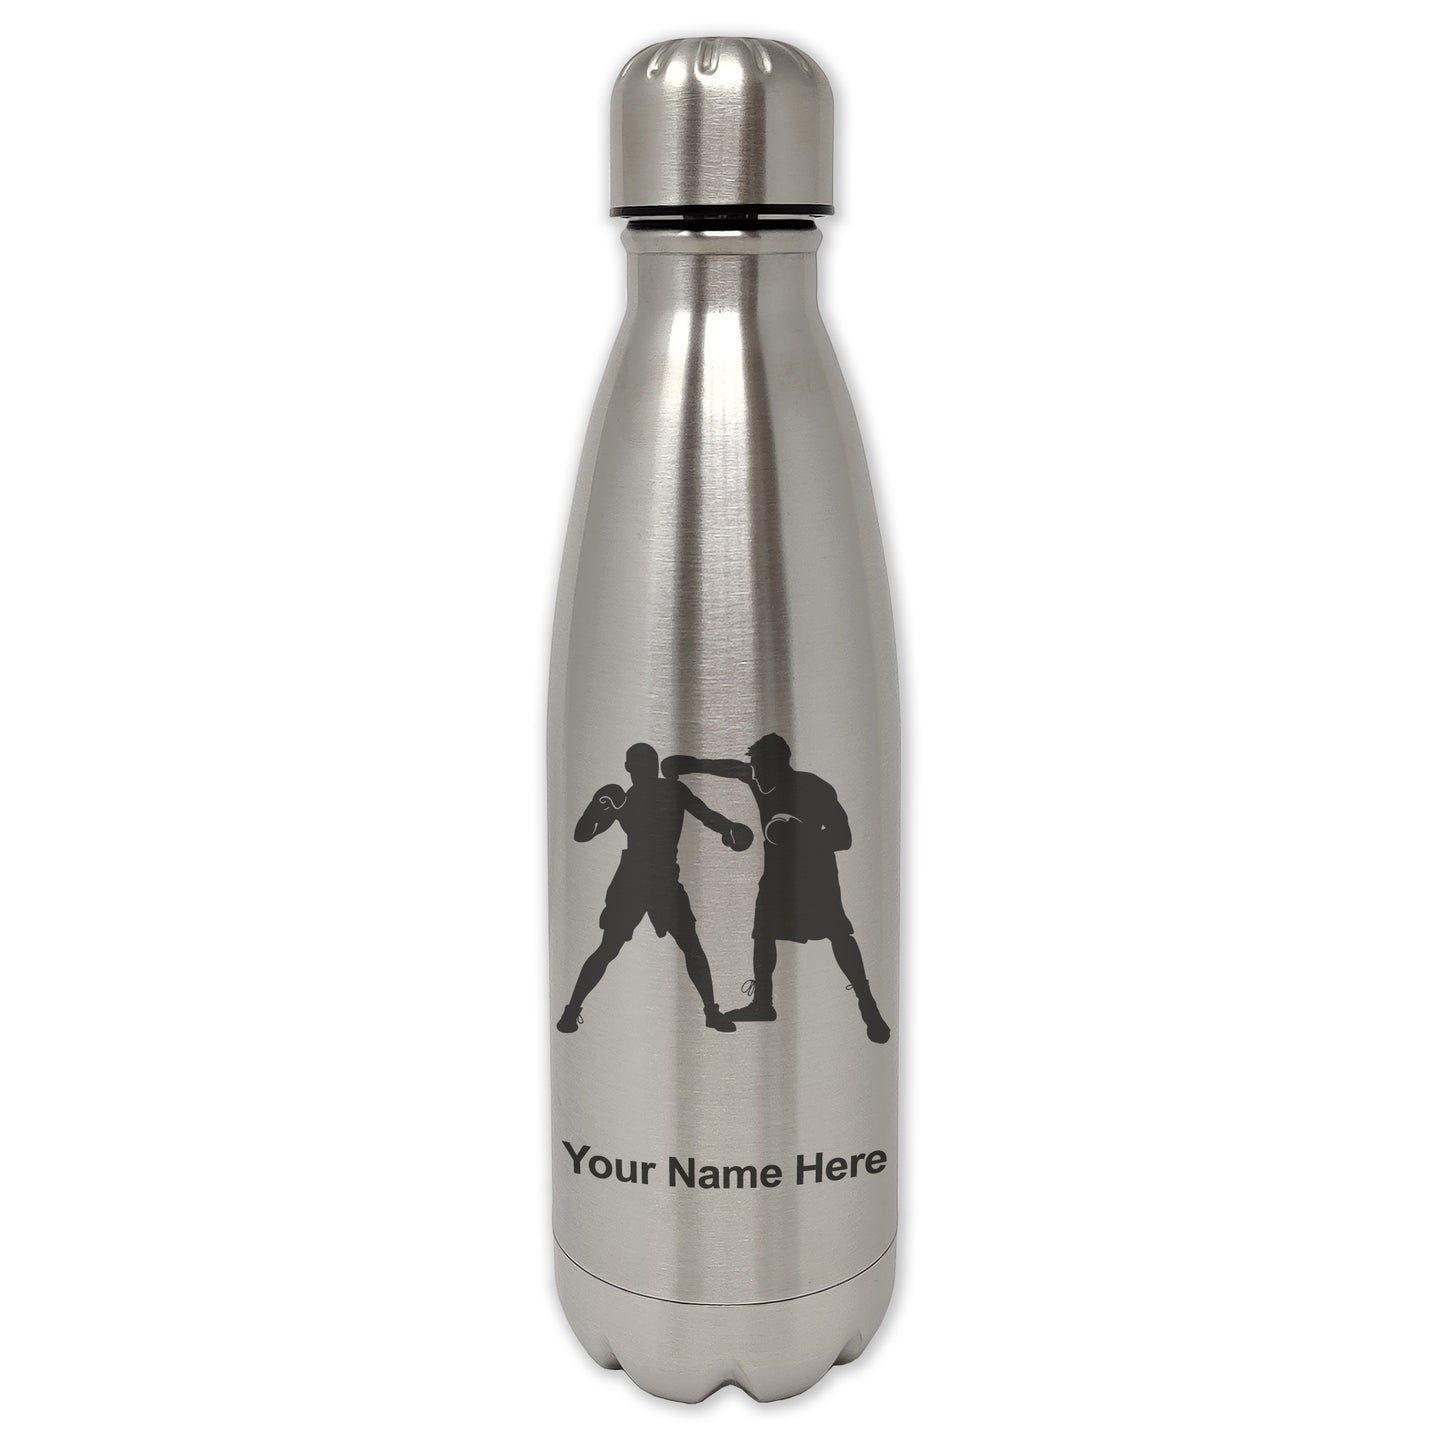 LaserGram Double Wall Water Bottle, Boxers Boxing, Personalized Engraving Included